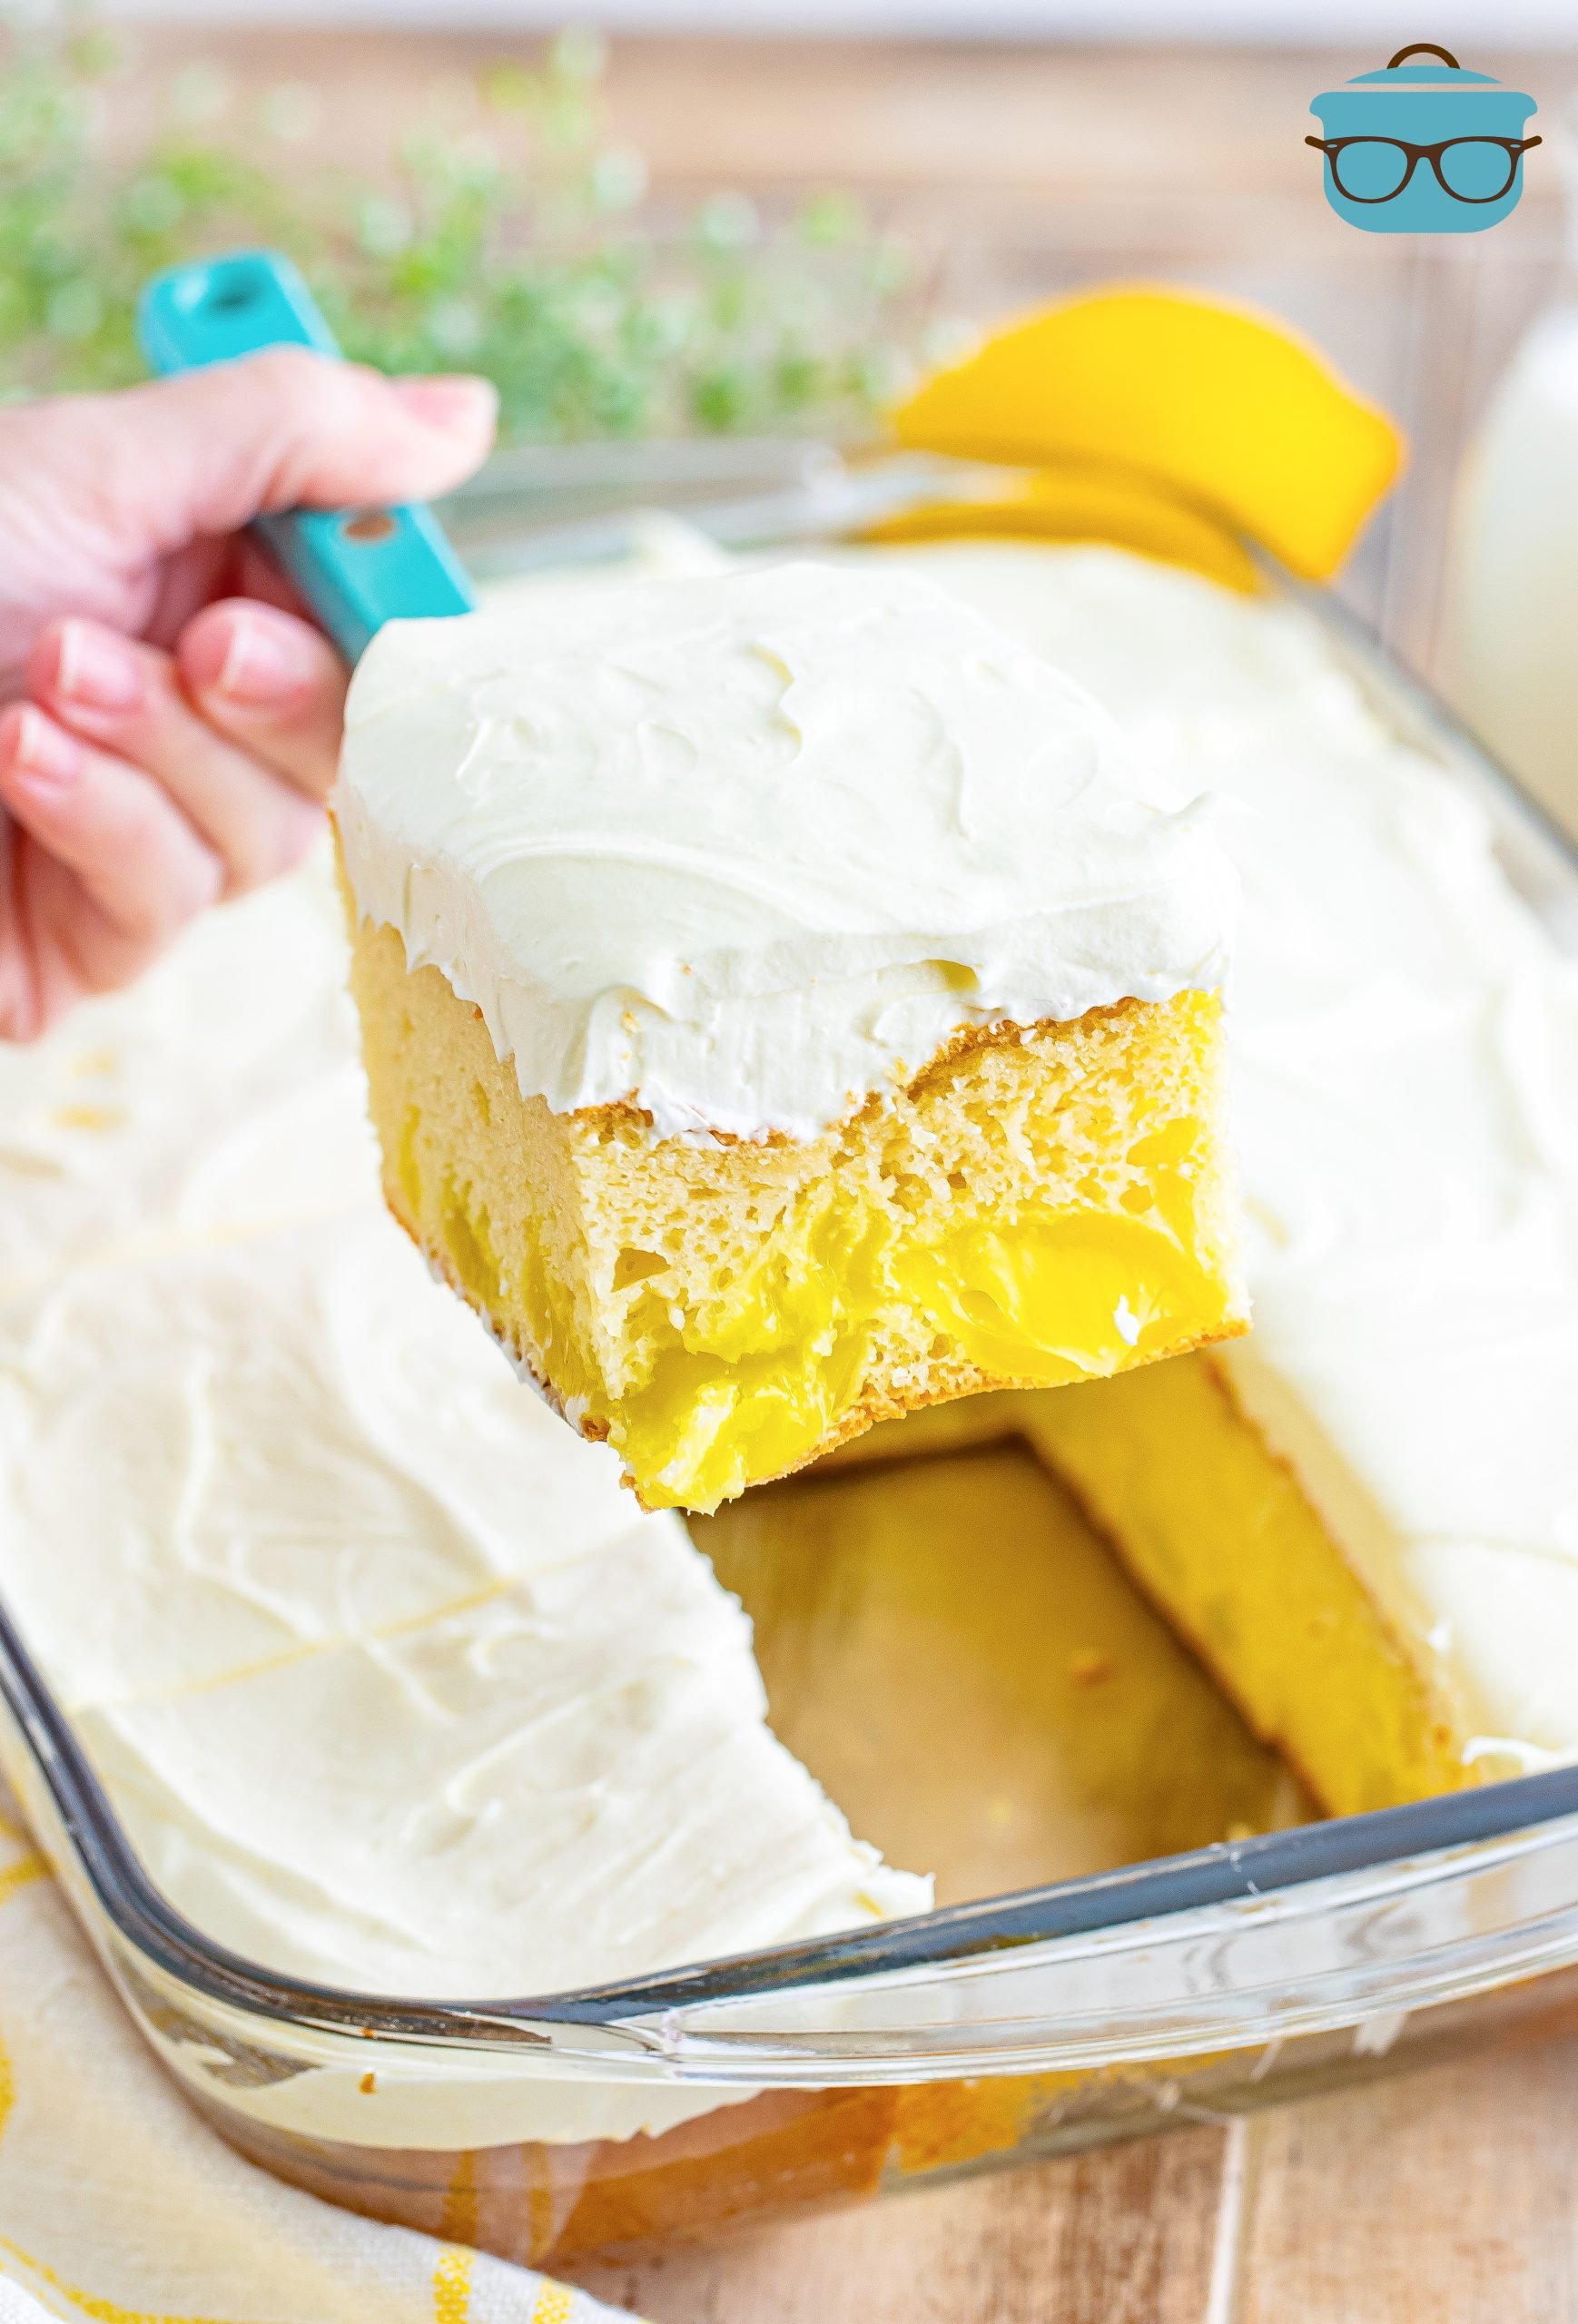 A slice of Lemon Dream Cake being removed from the baking dish with the rest of the cake.